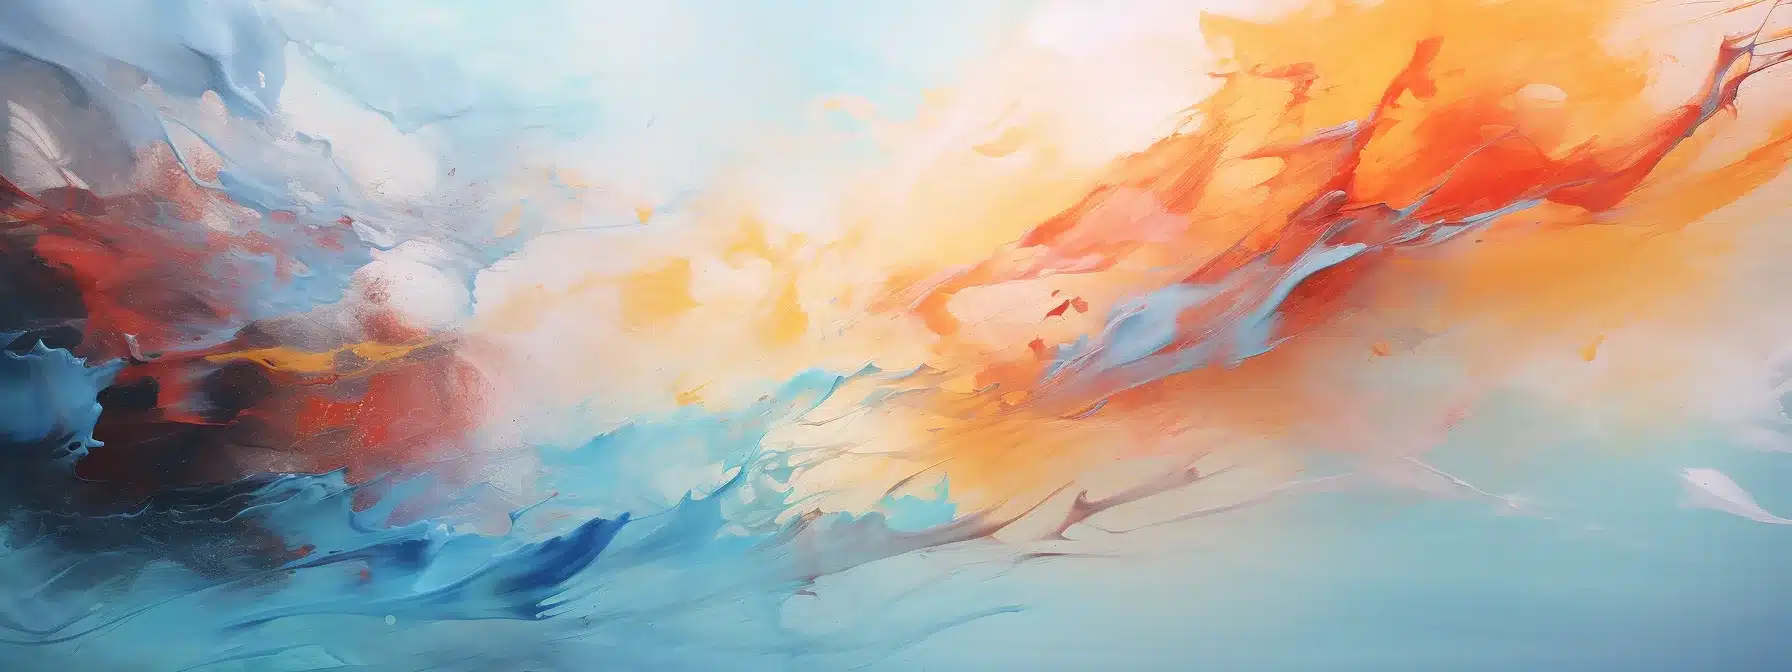 A Captivating And Consistent Brand Identity Reflected In A Painting With Evolving Brushstrokes.